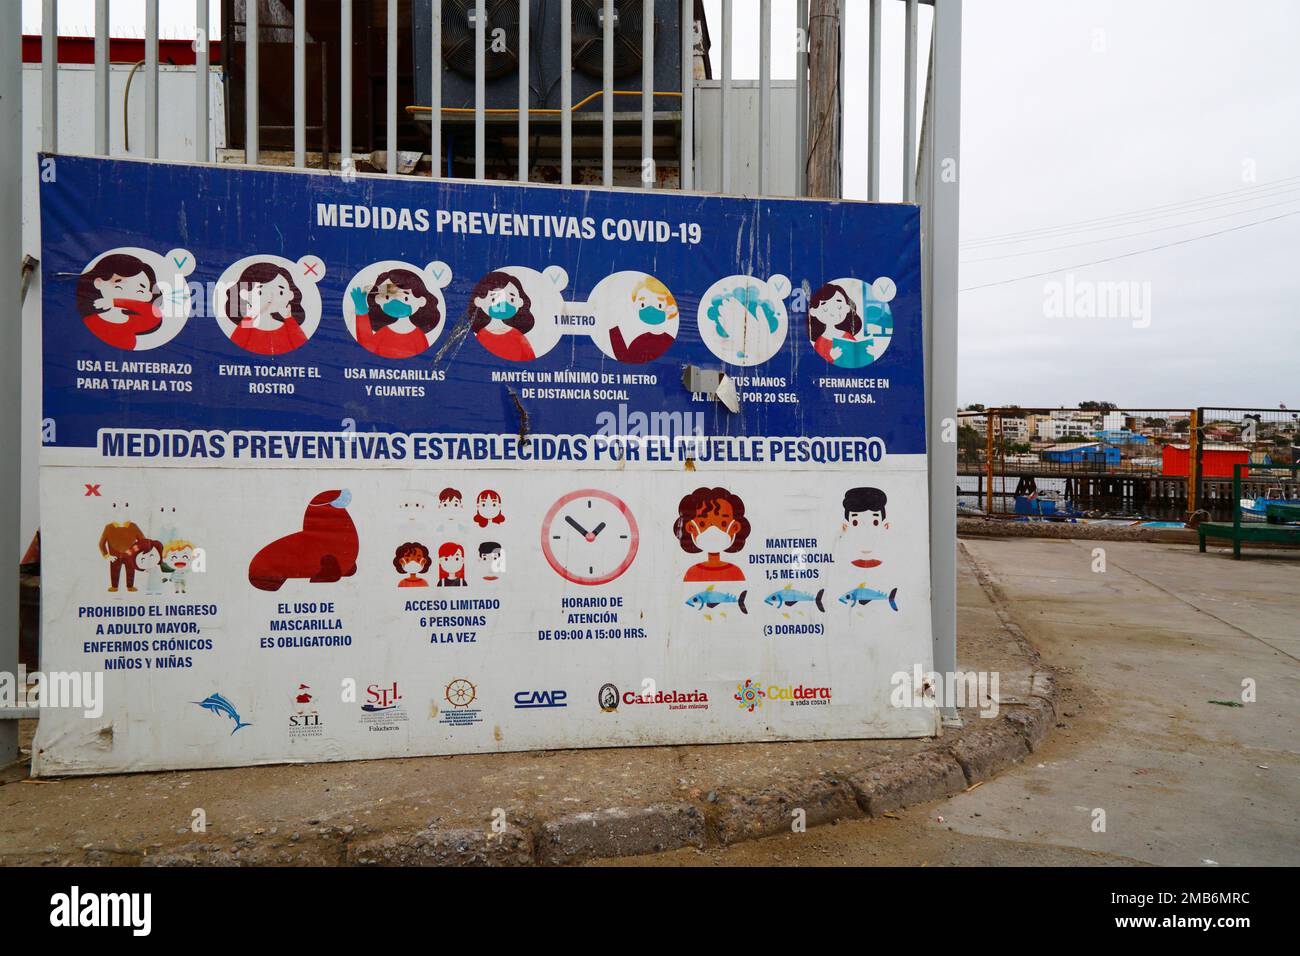 Detail of sign with recommendations to prevent the spread of the covid-19 coronavirus at entrance to fishing port and docks, Caldera, Region III; Chile. Stock Photo